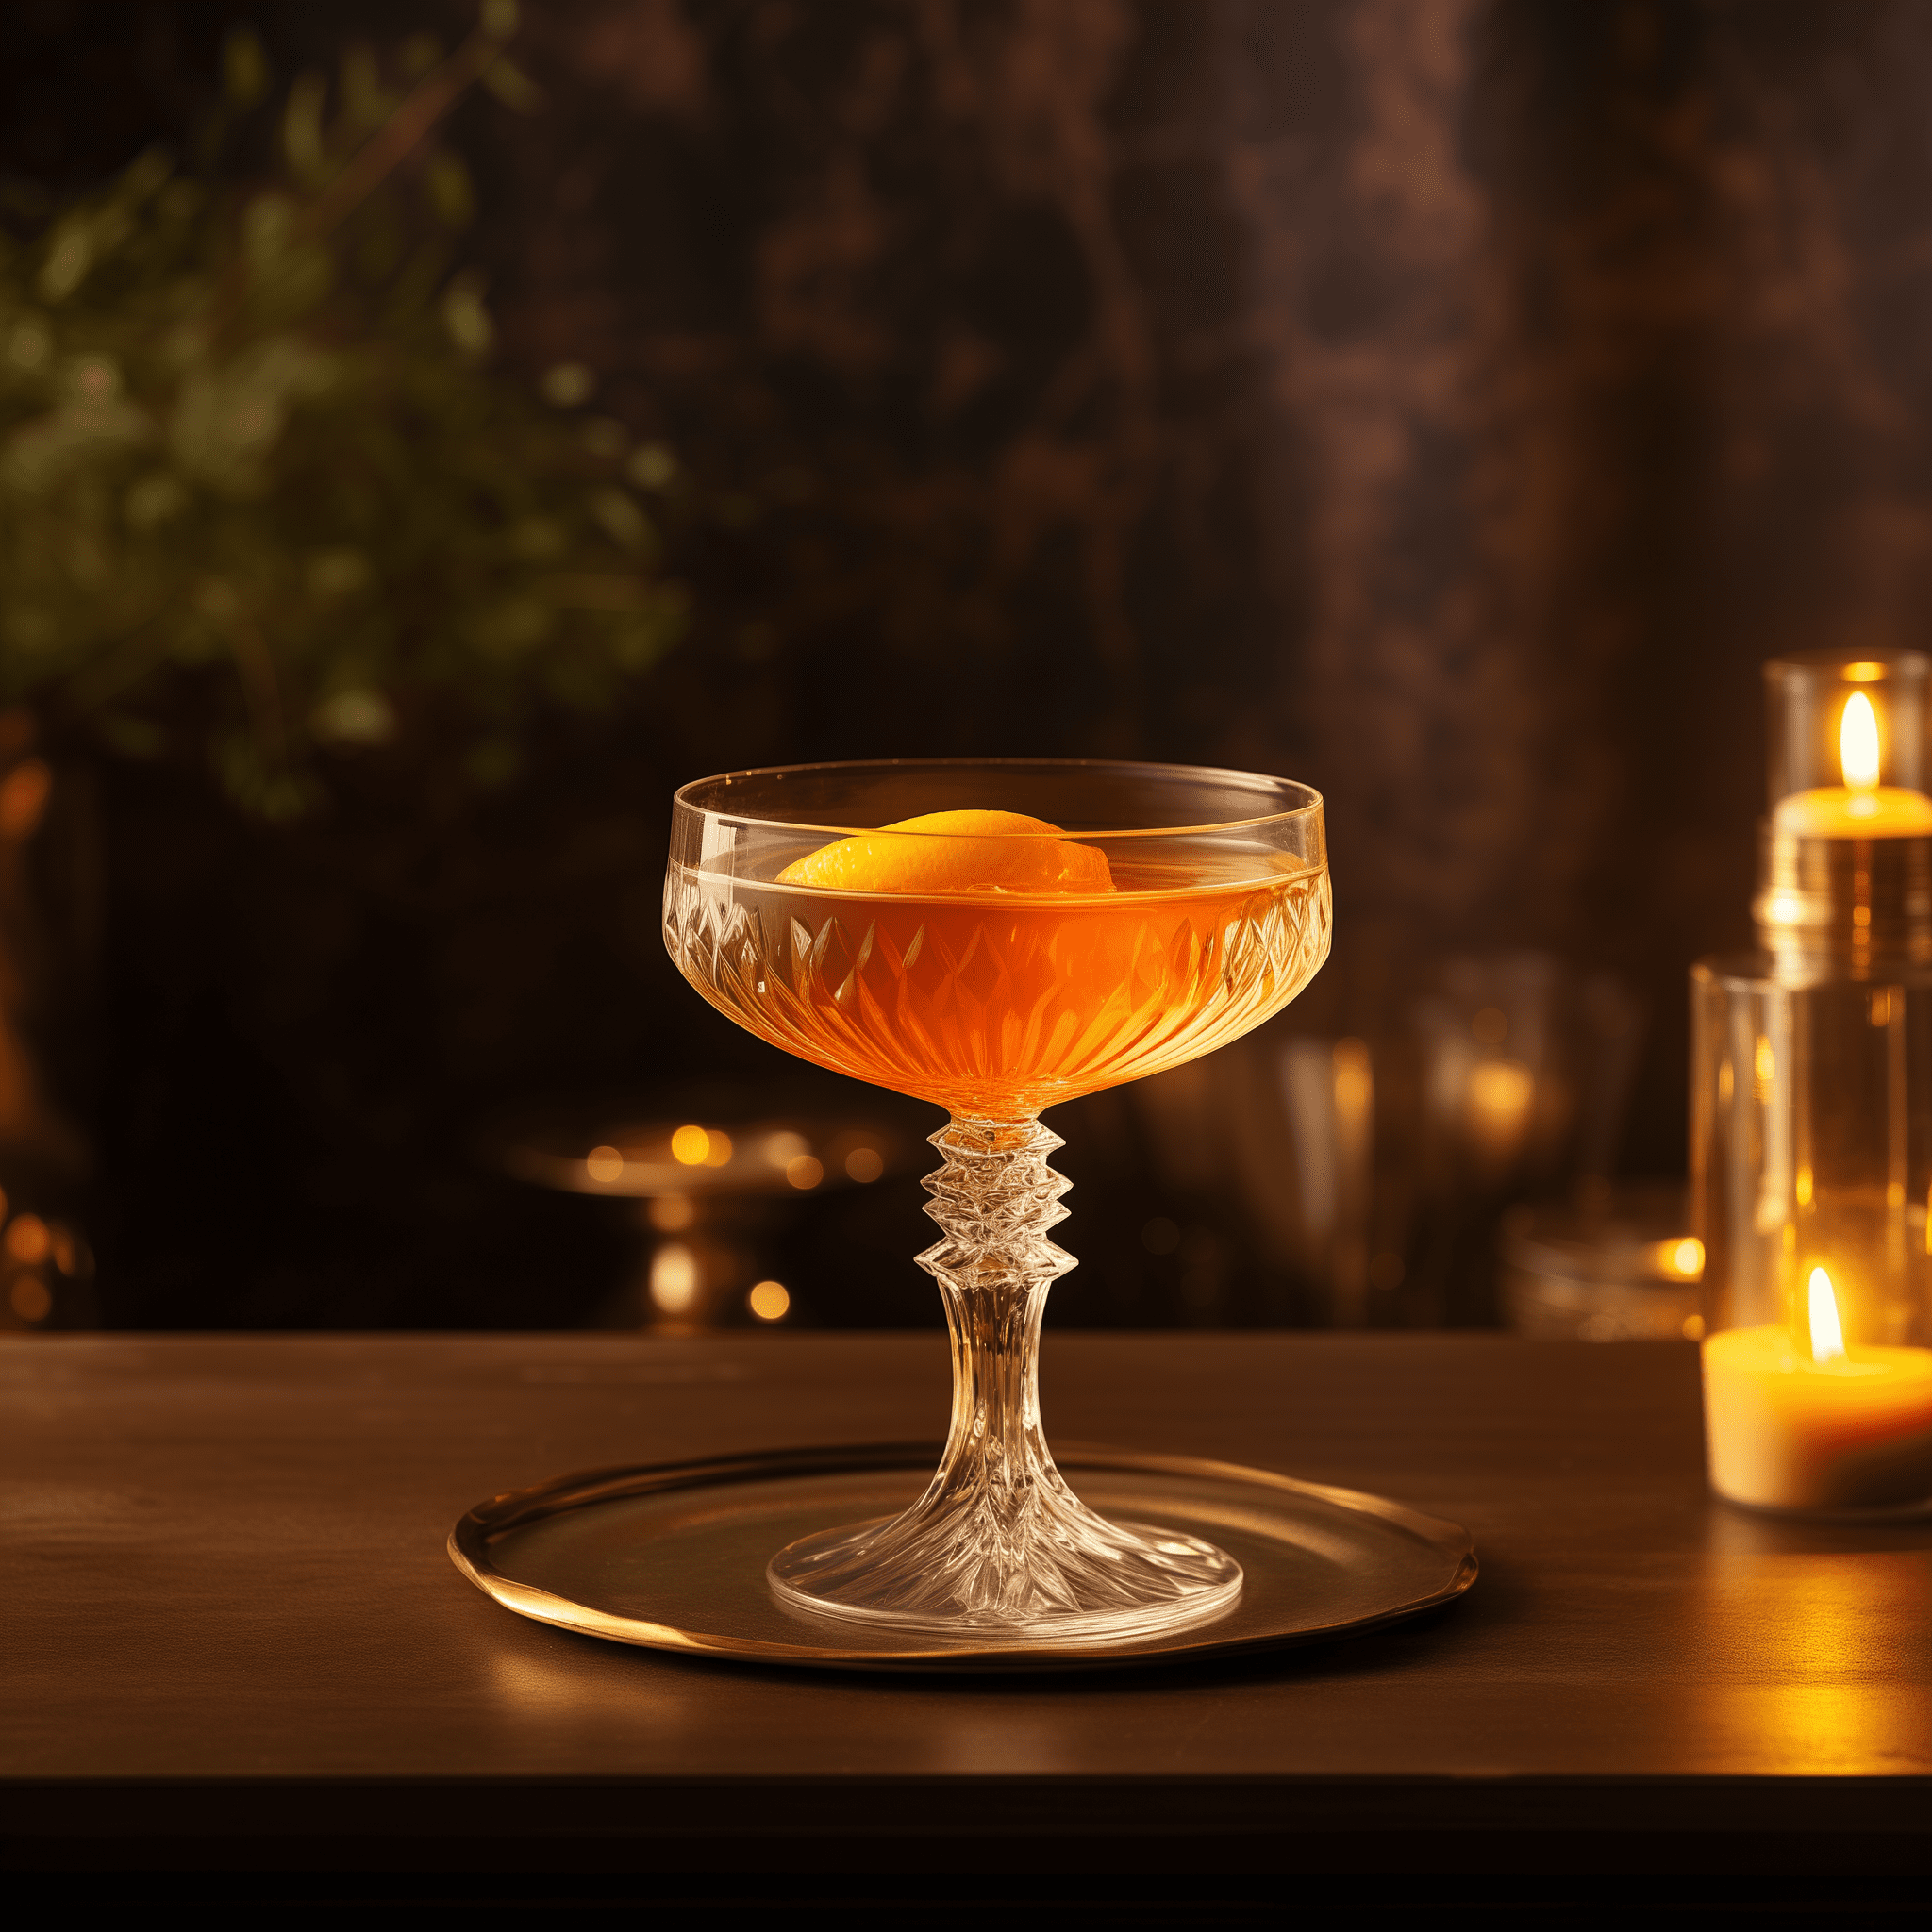 Peach Manhattan Cocktail Recipe - The Peach Manhattan is a harmonious blend of bold and smooth flavors. The whiskey provides a robust foundation, while the peach liqueur adds a sweet, fruity note. The vermouth balances the sweetness with its herbal undertones, and the bitters bring everything together with a hint of spice.